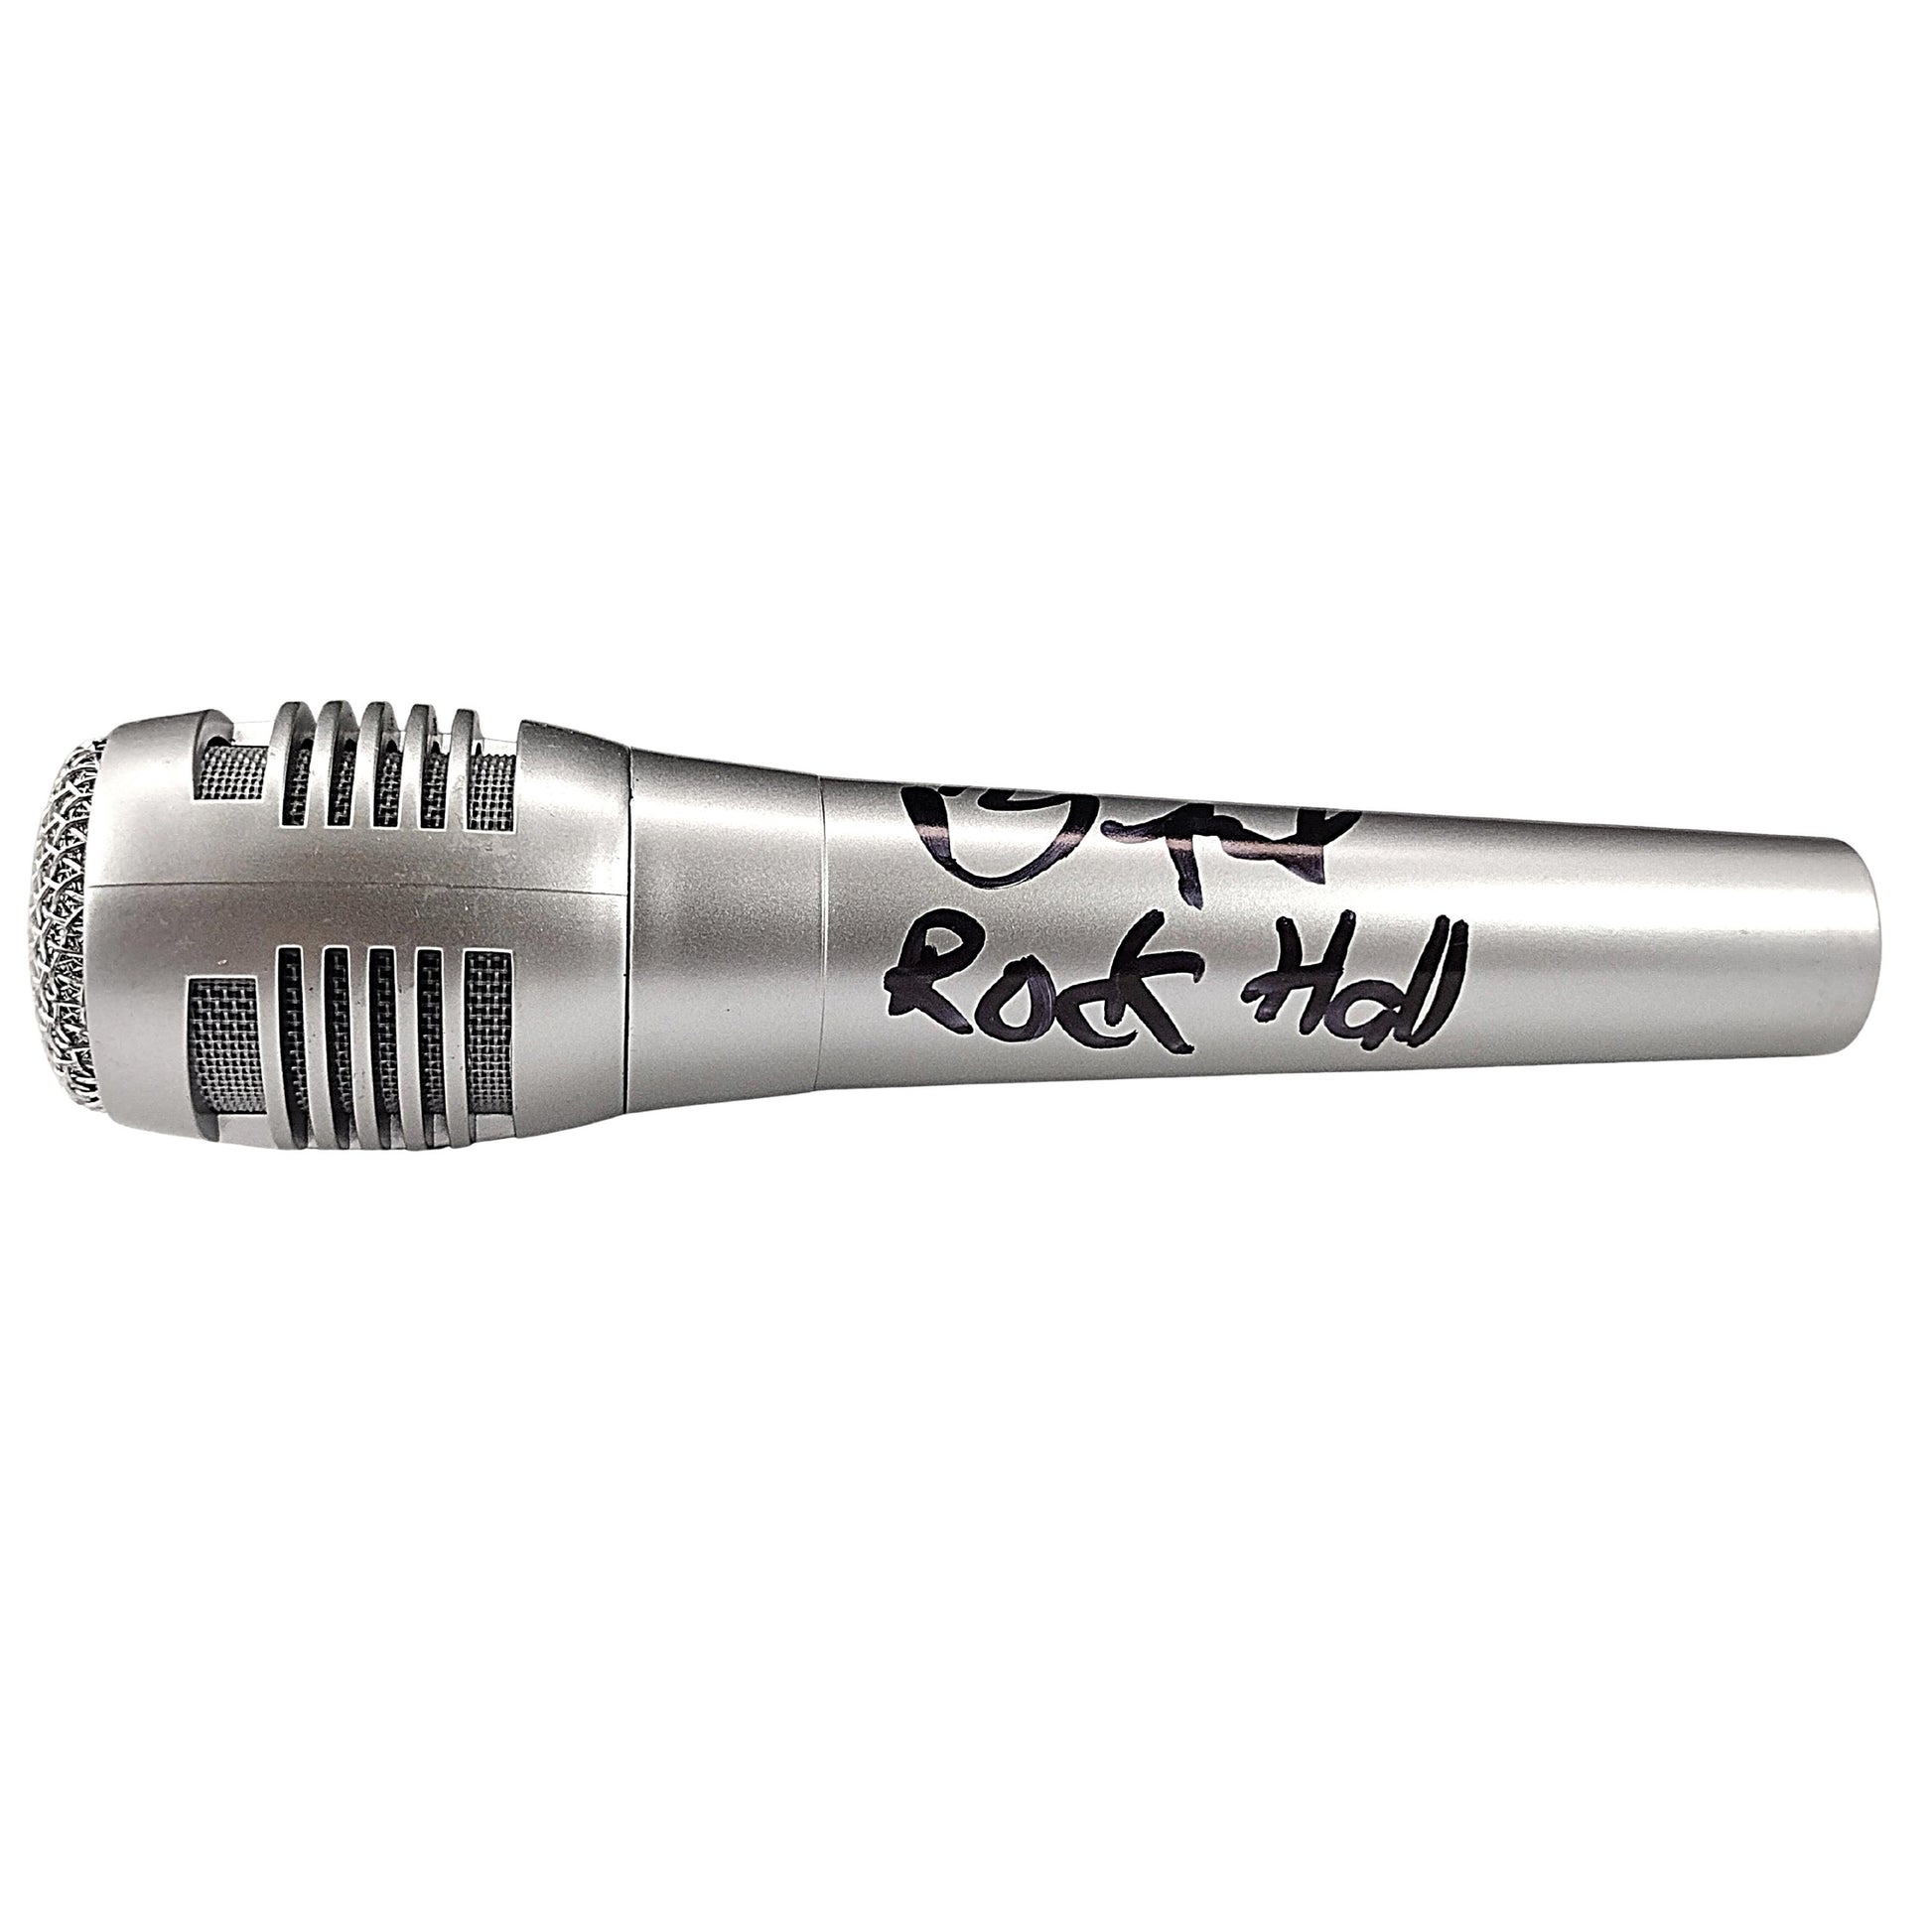 Music- Autographed- DJ Yella Signed Microphone with Rock Hall Inscription NWA Rap Rapper Beckett Authentication 304